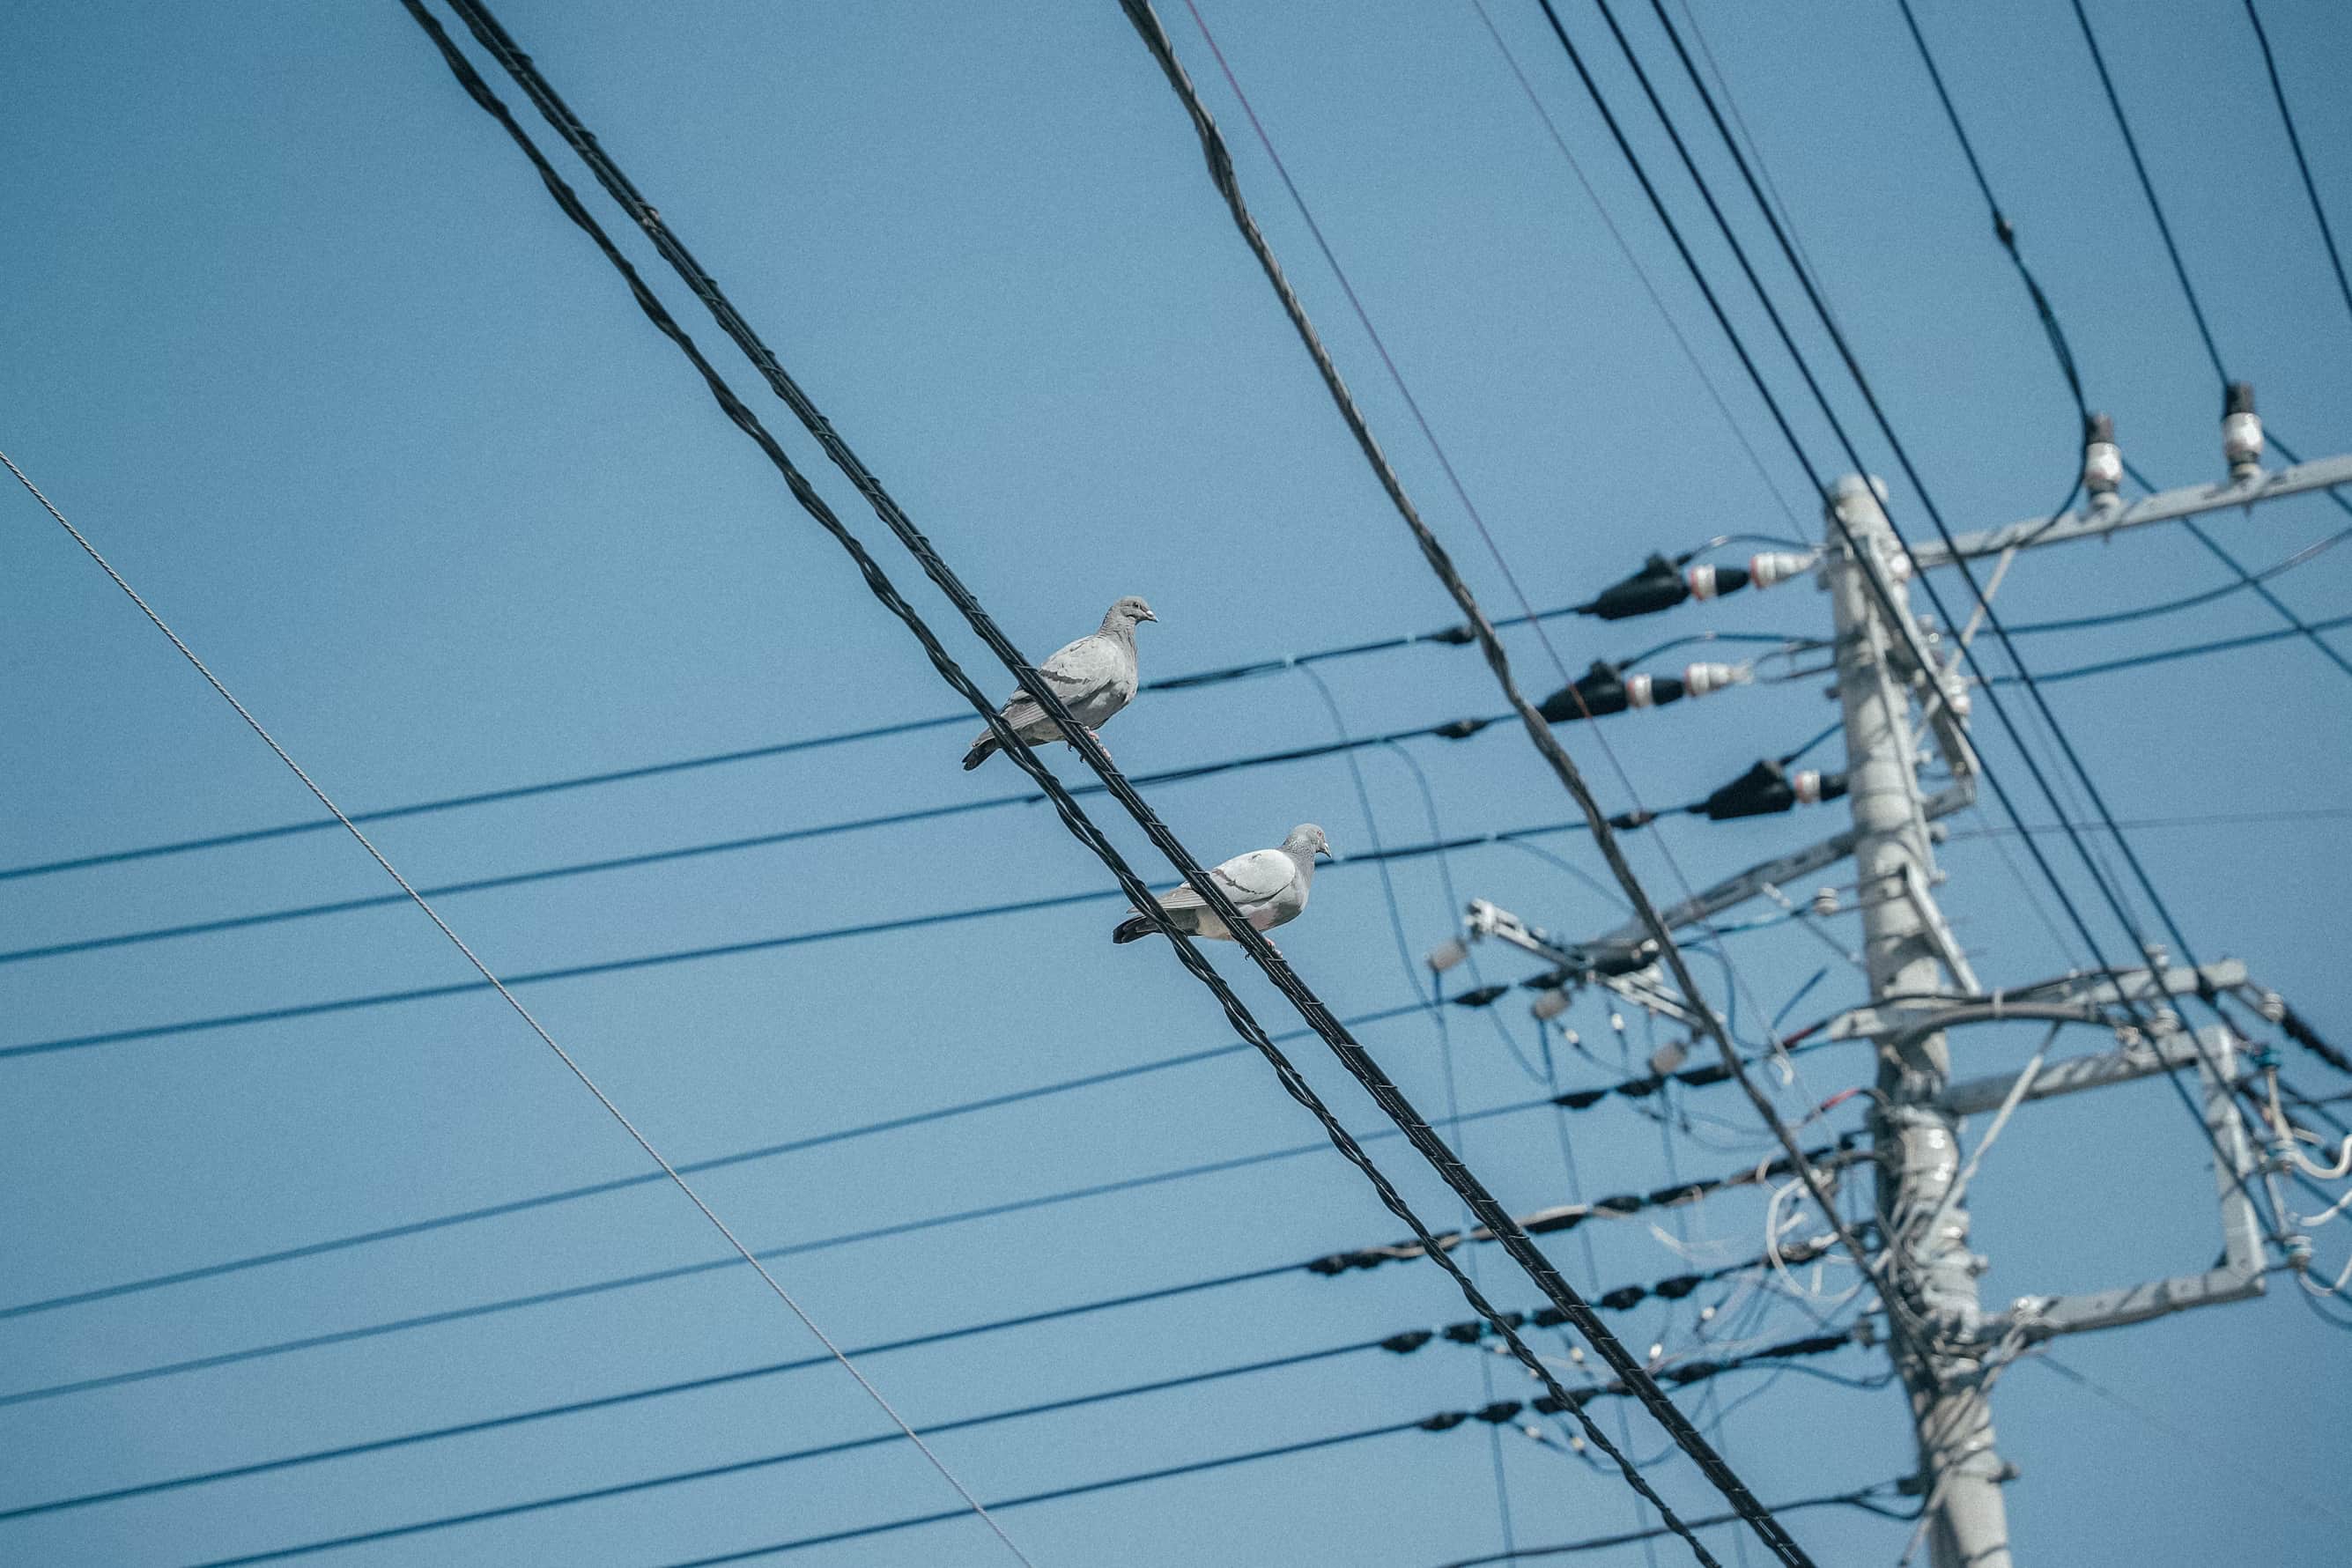 Criss-crossing power lines on which sit several pigeons against a blue sky.